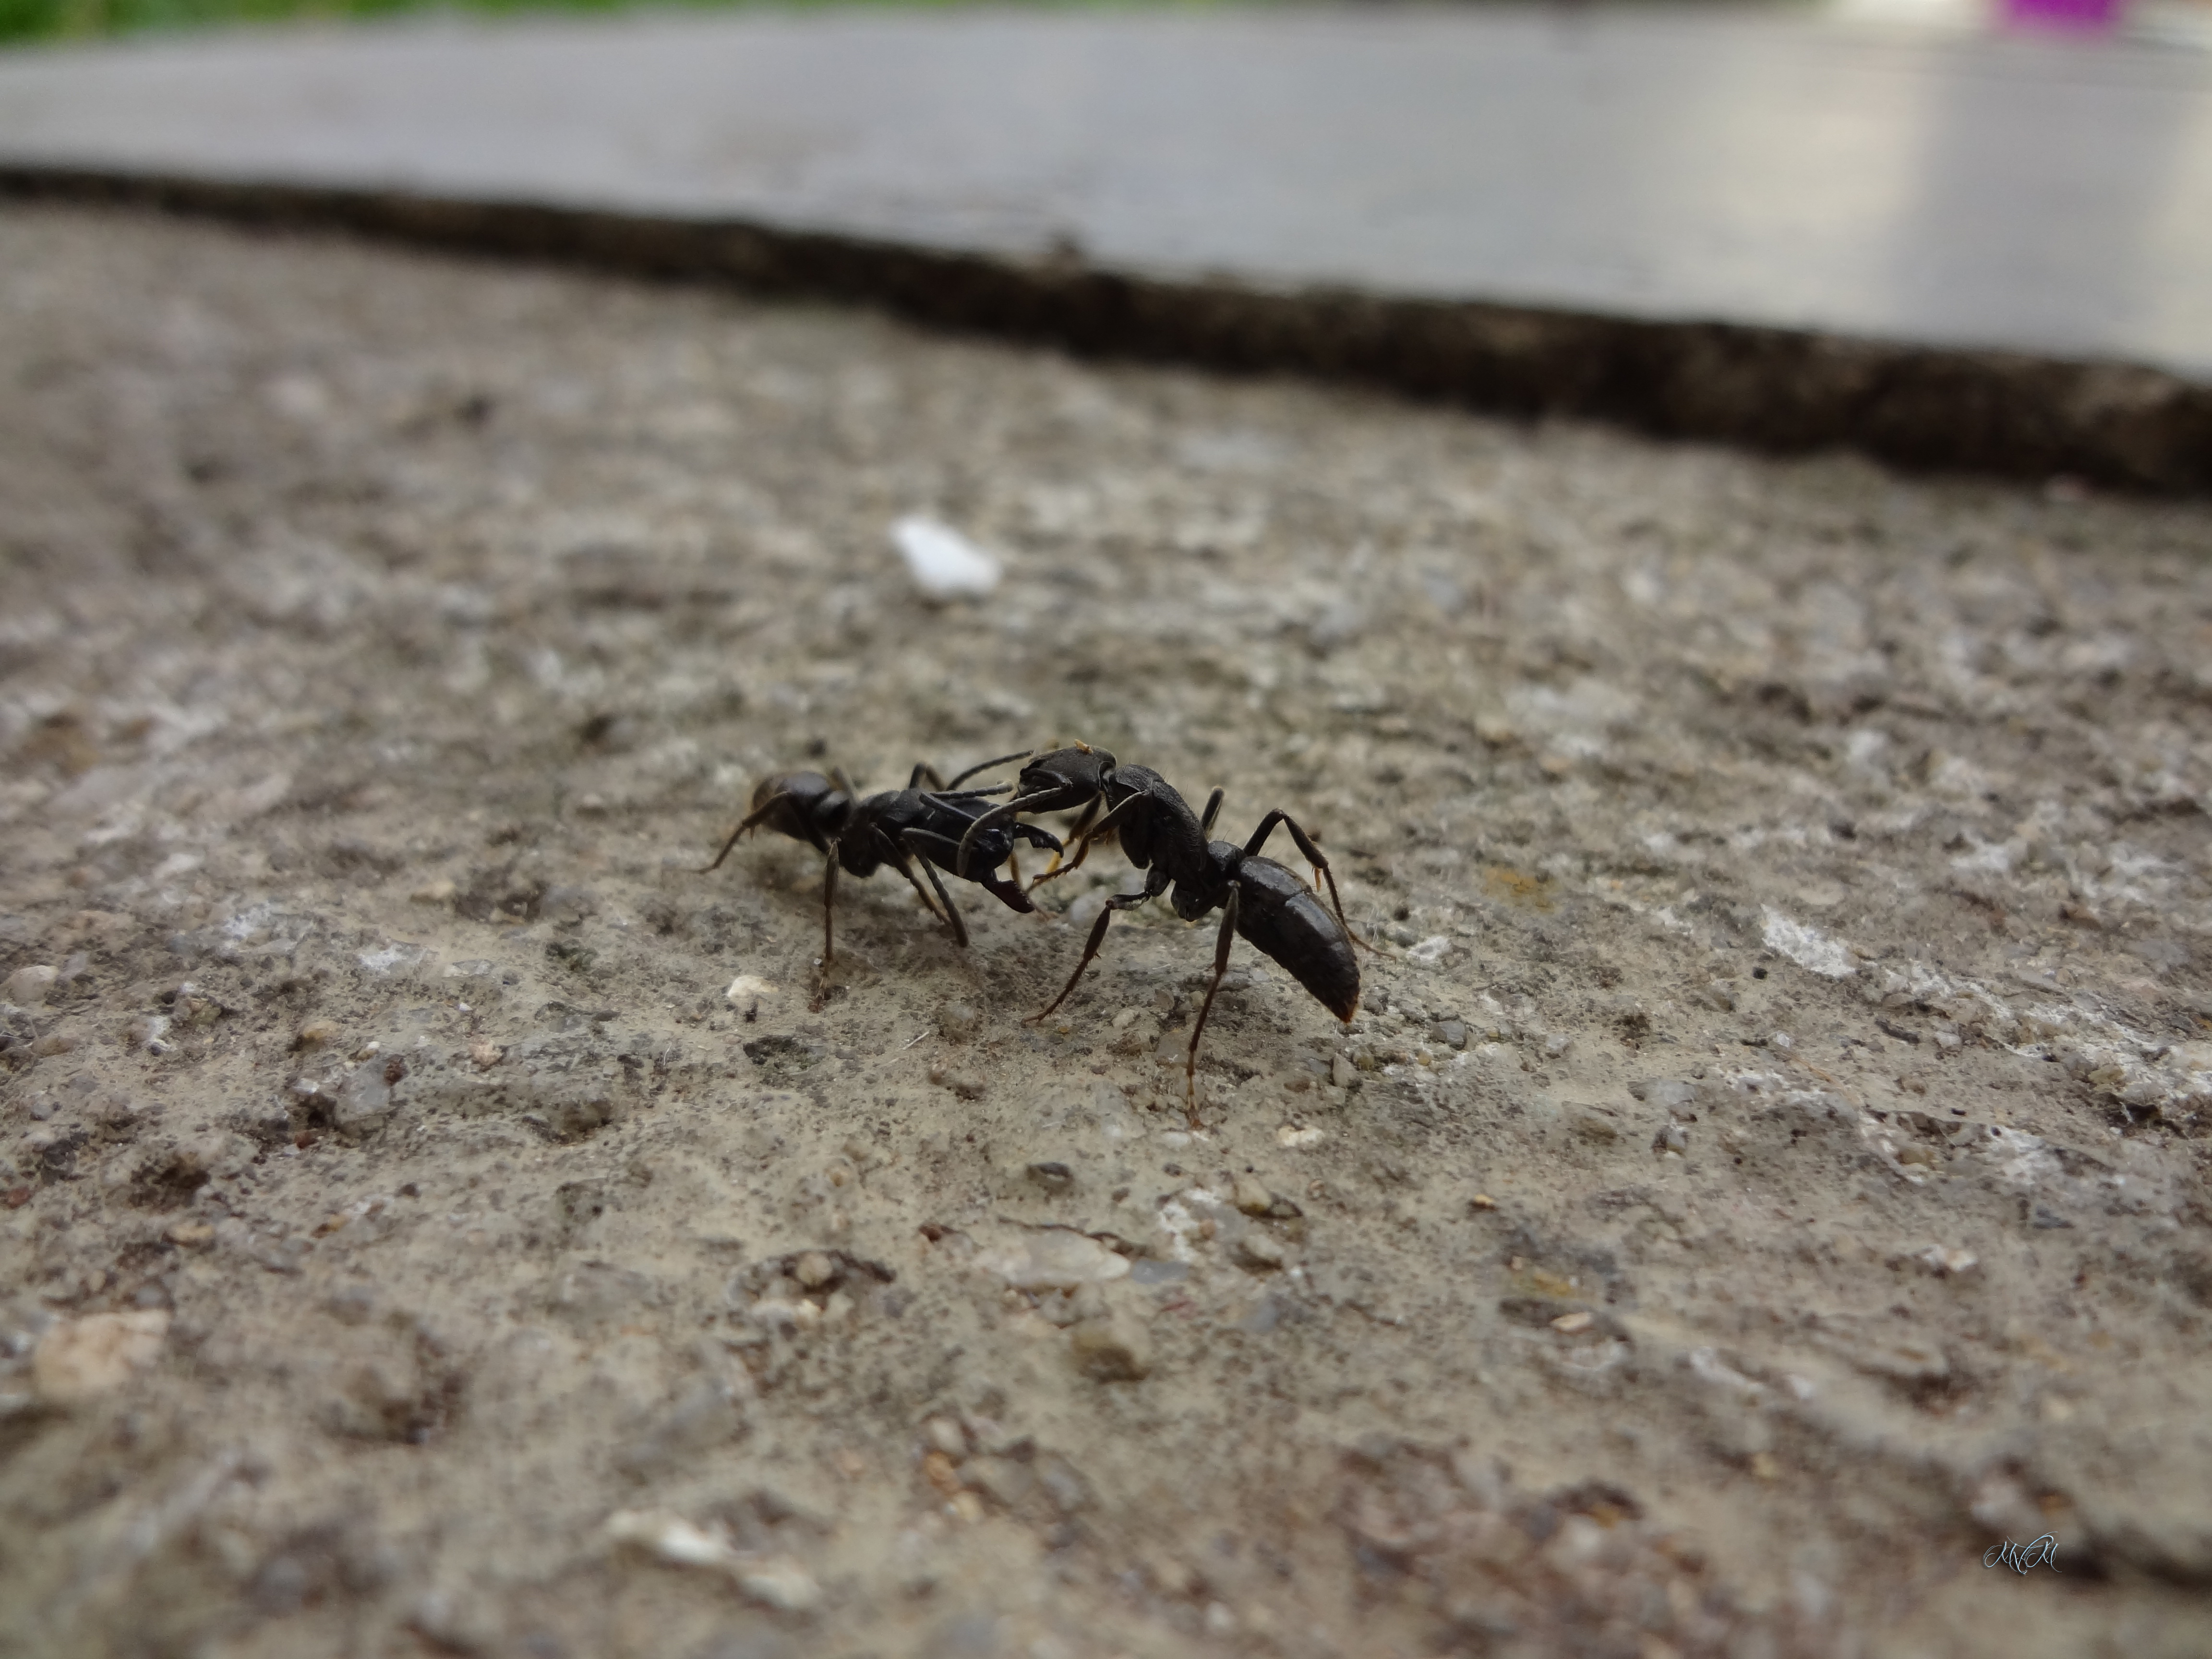 General 4608x3456 insect ants ground fighting depth of field